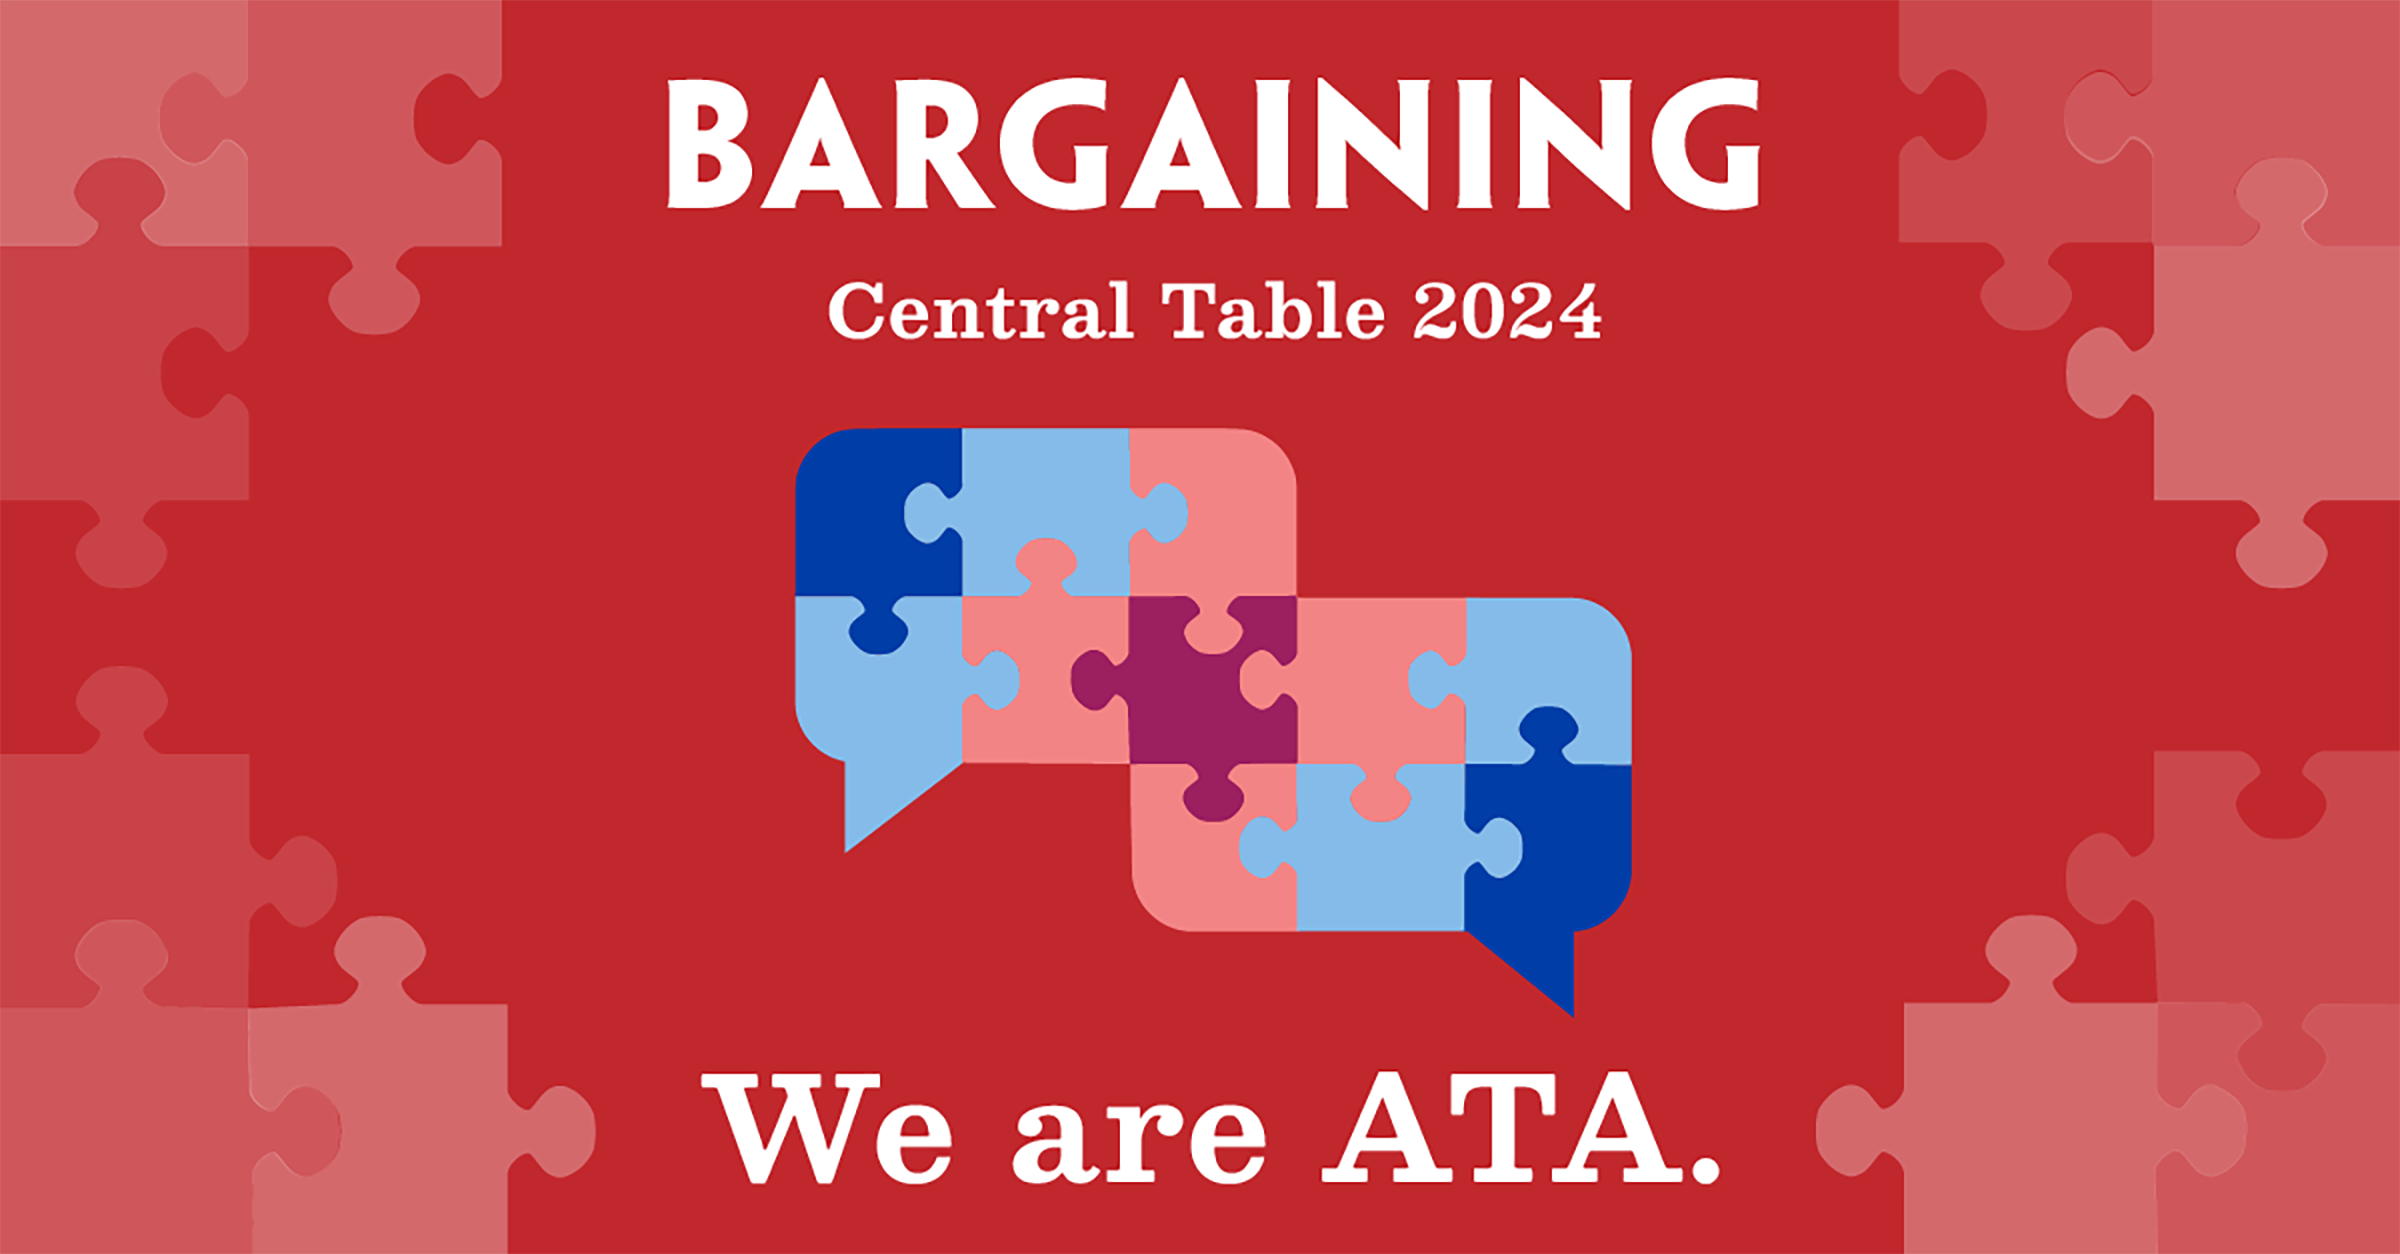 Puzzle pieces representing bargaining central table 2024